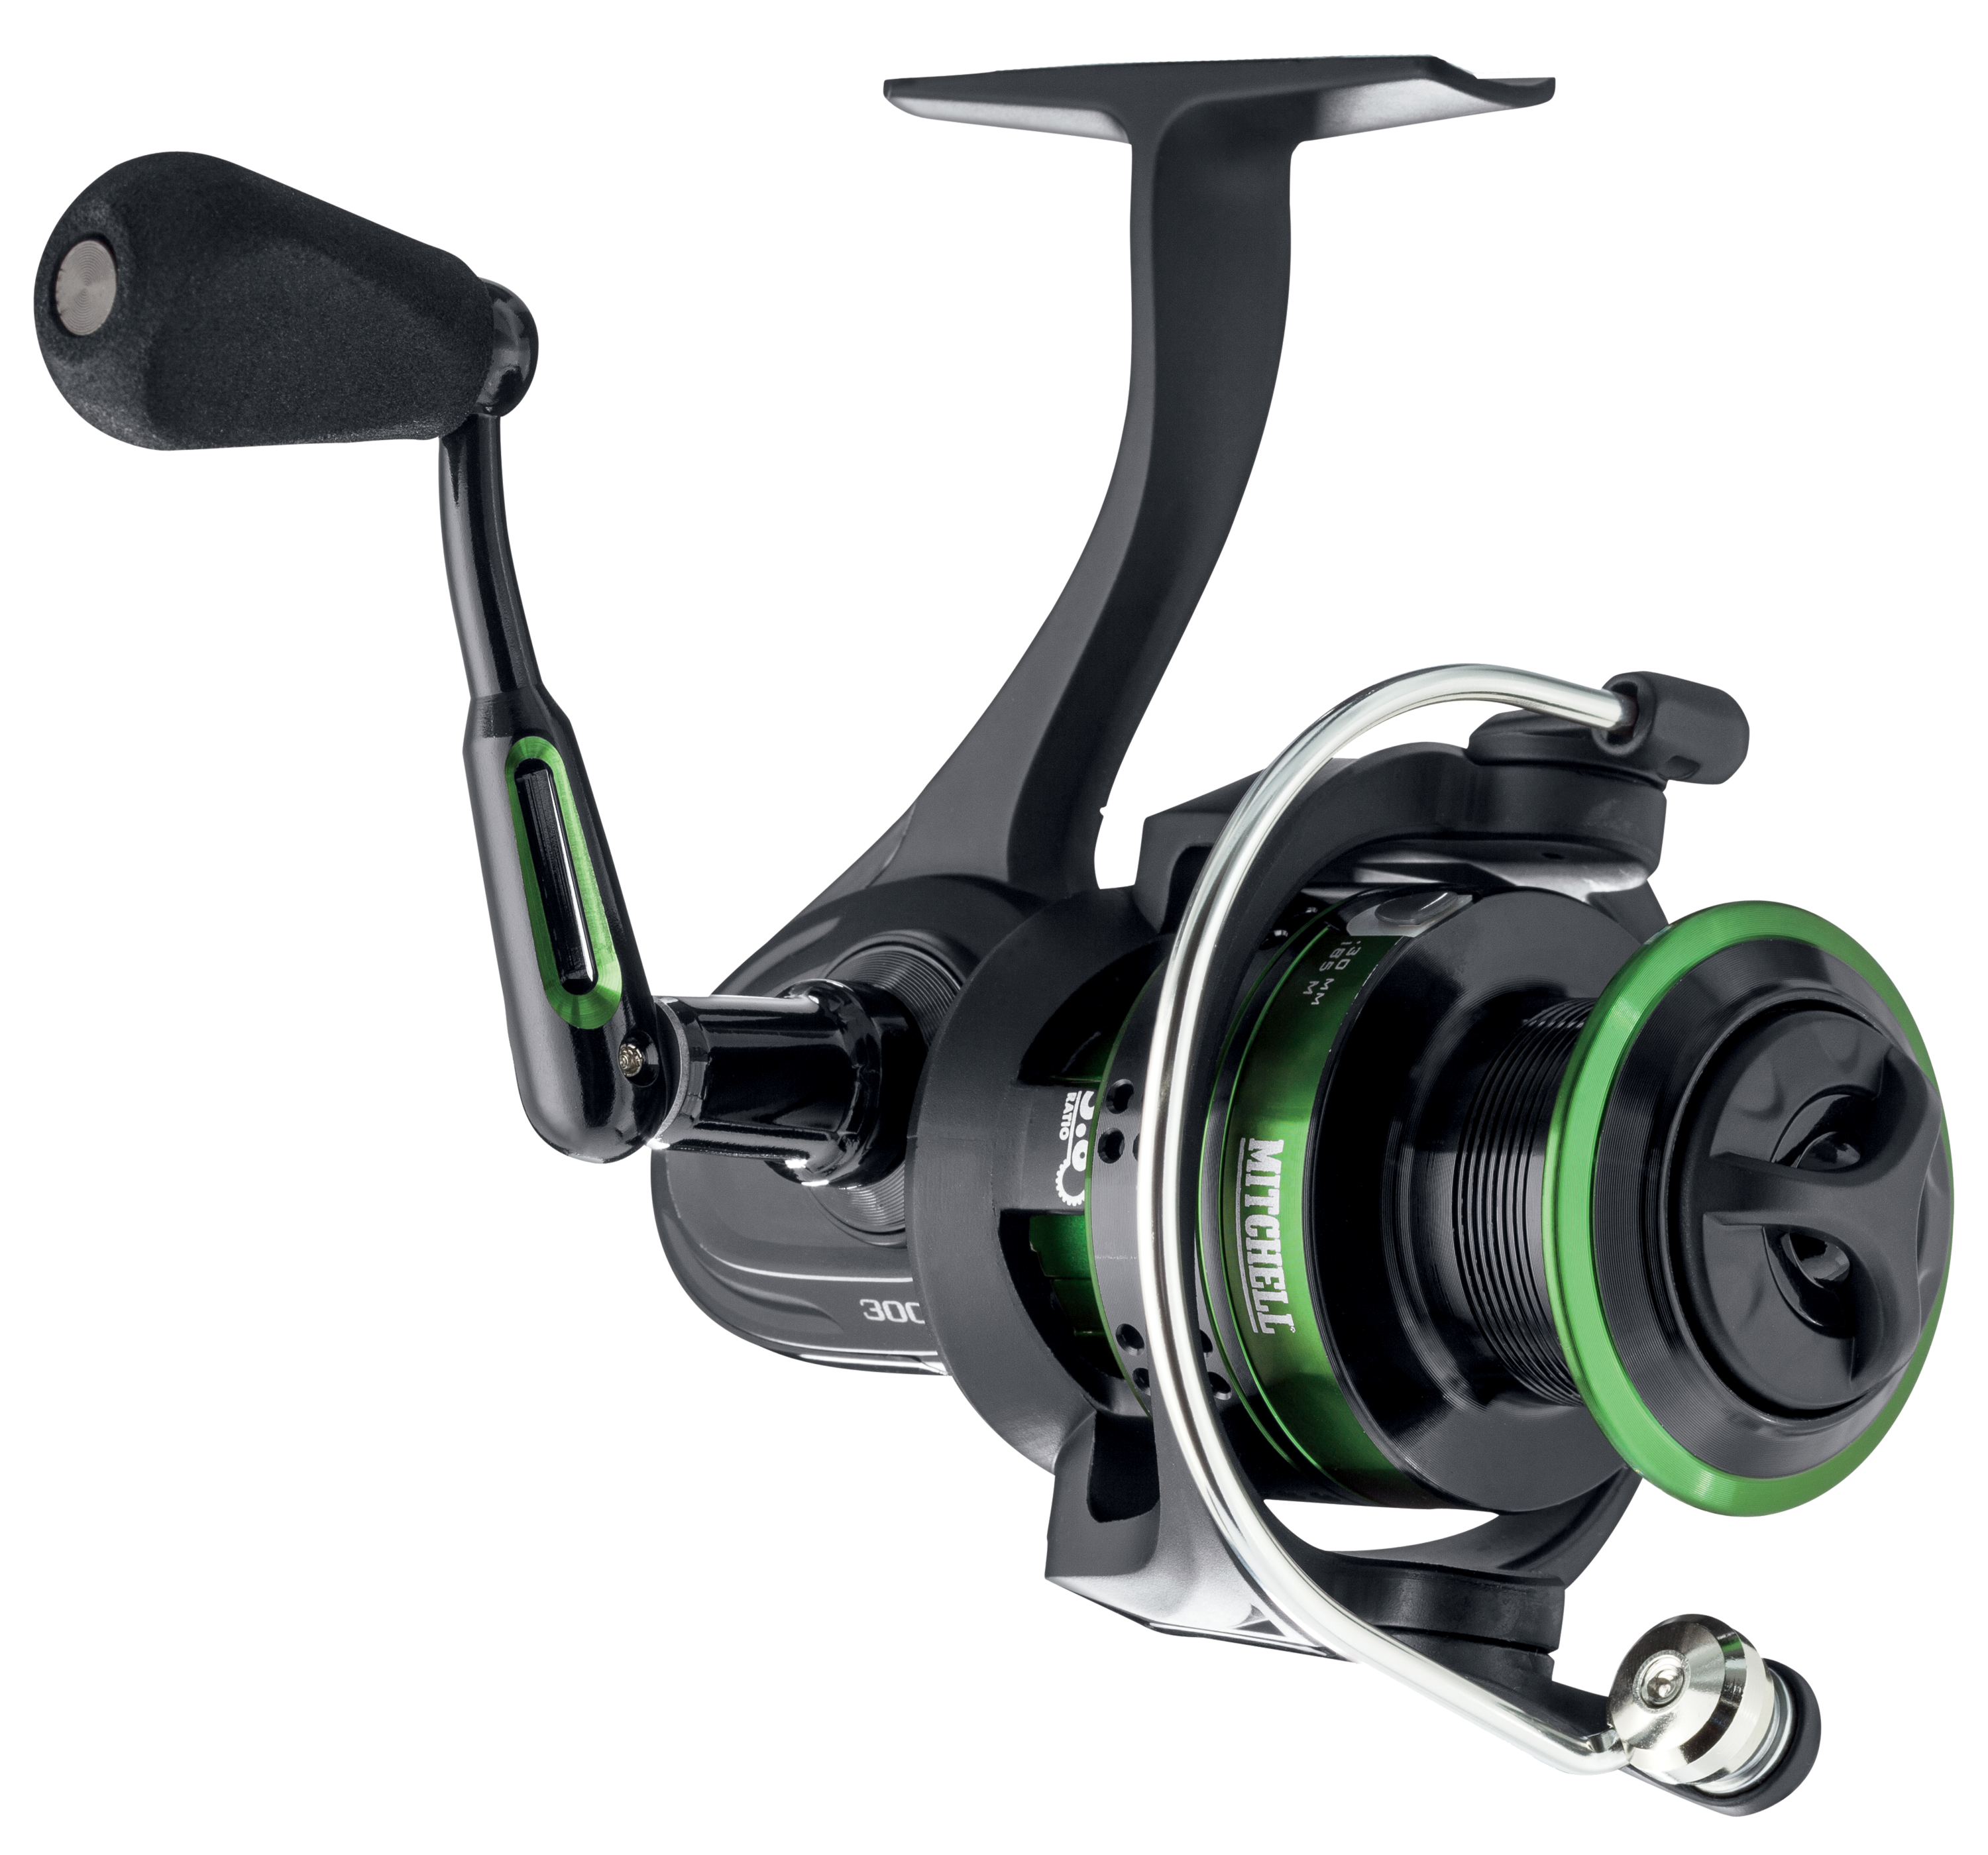 Mitchell spinning 3000 REEL MAG PRO R